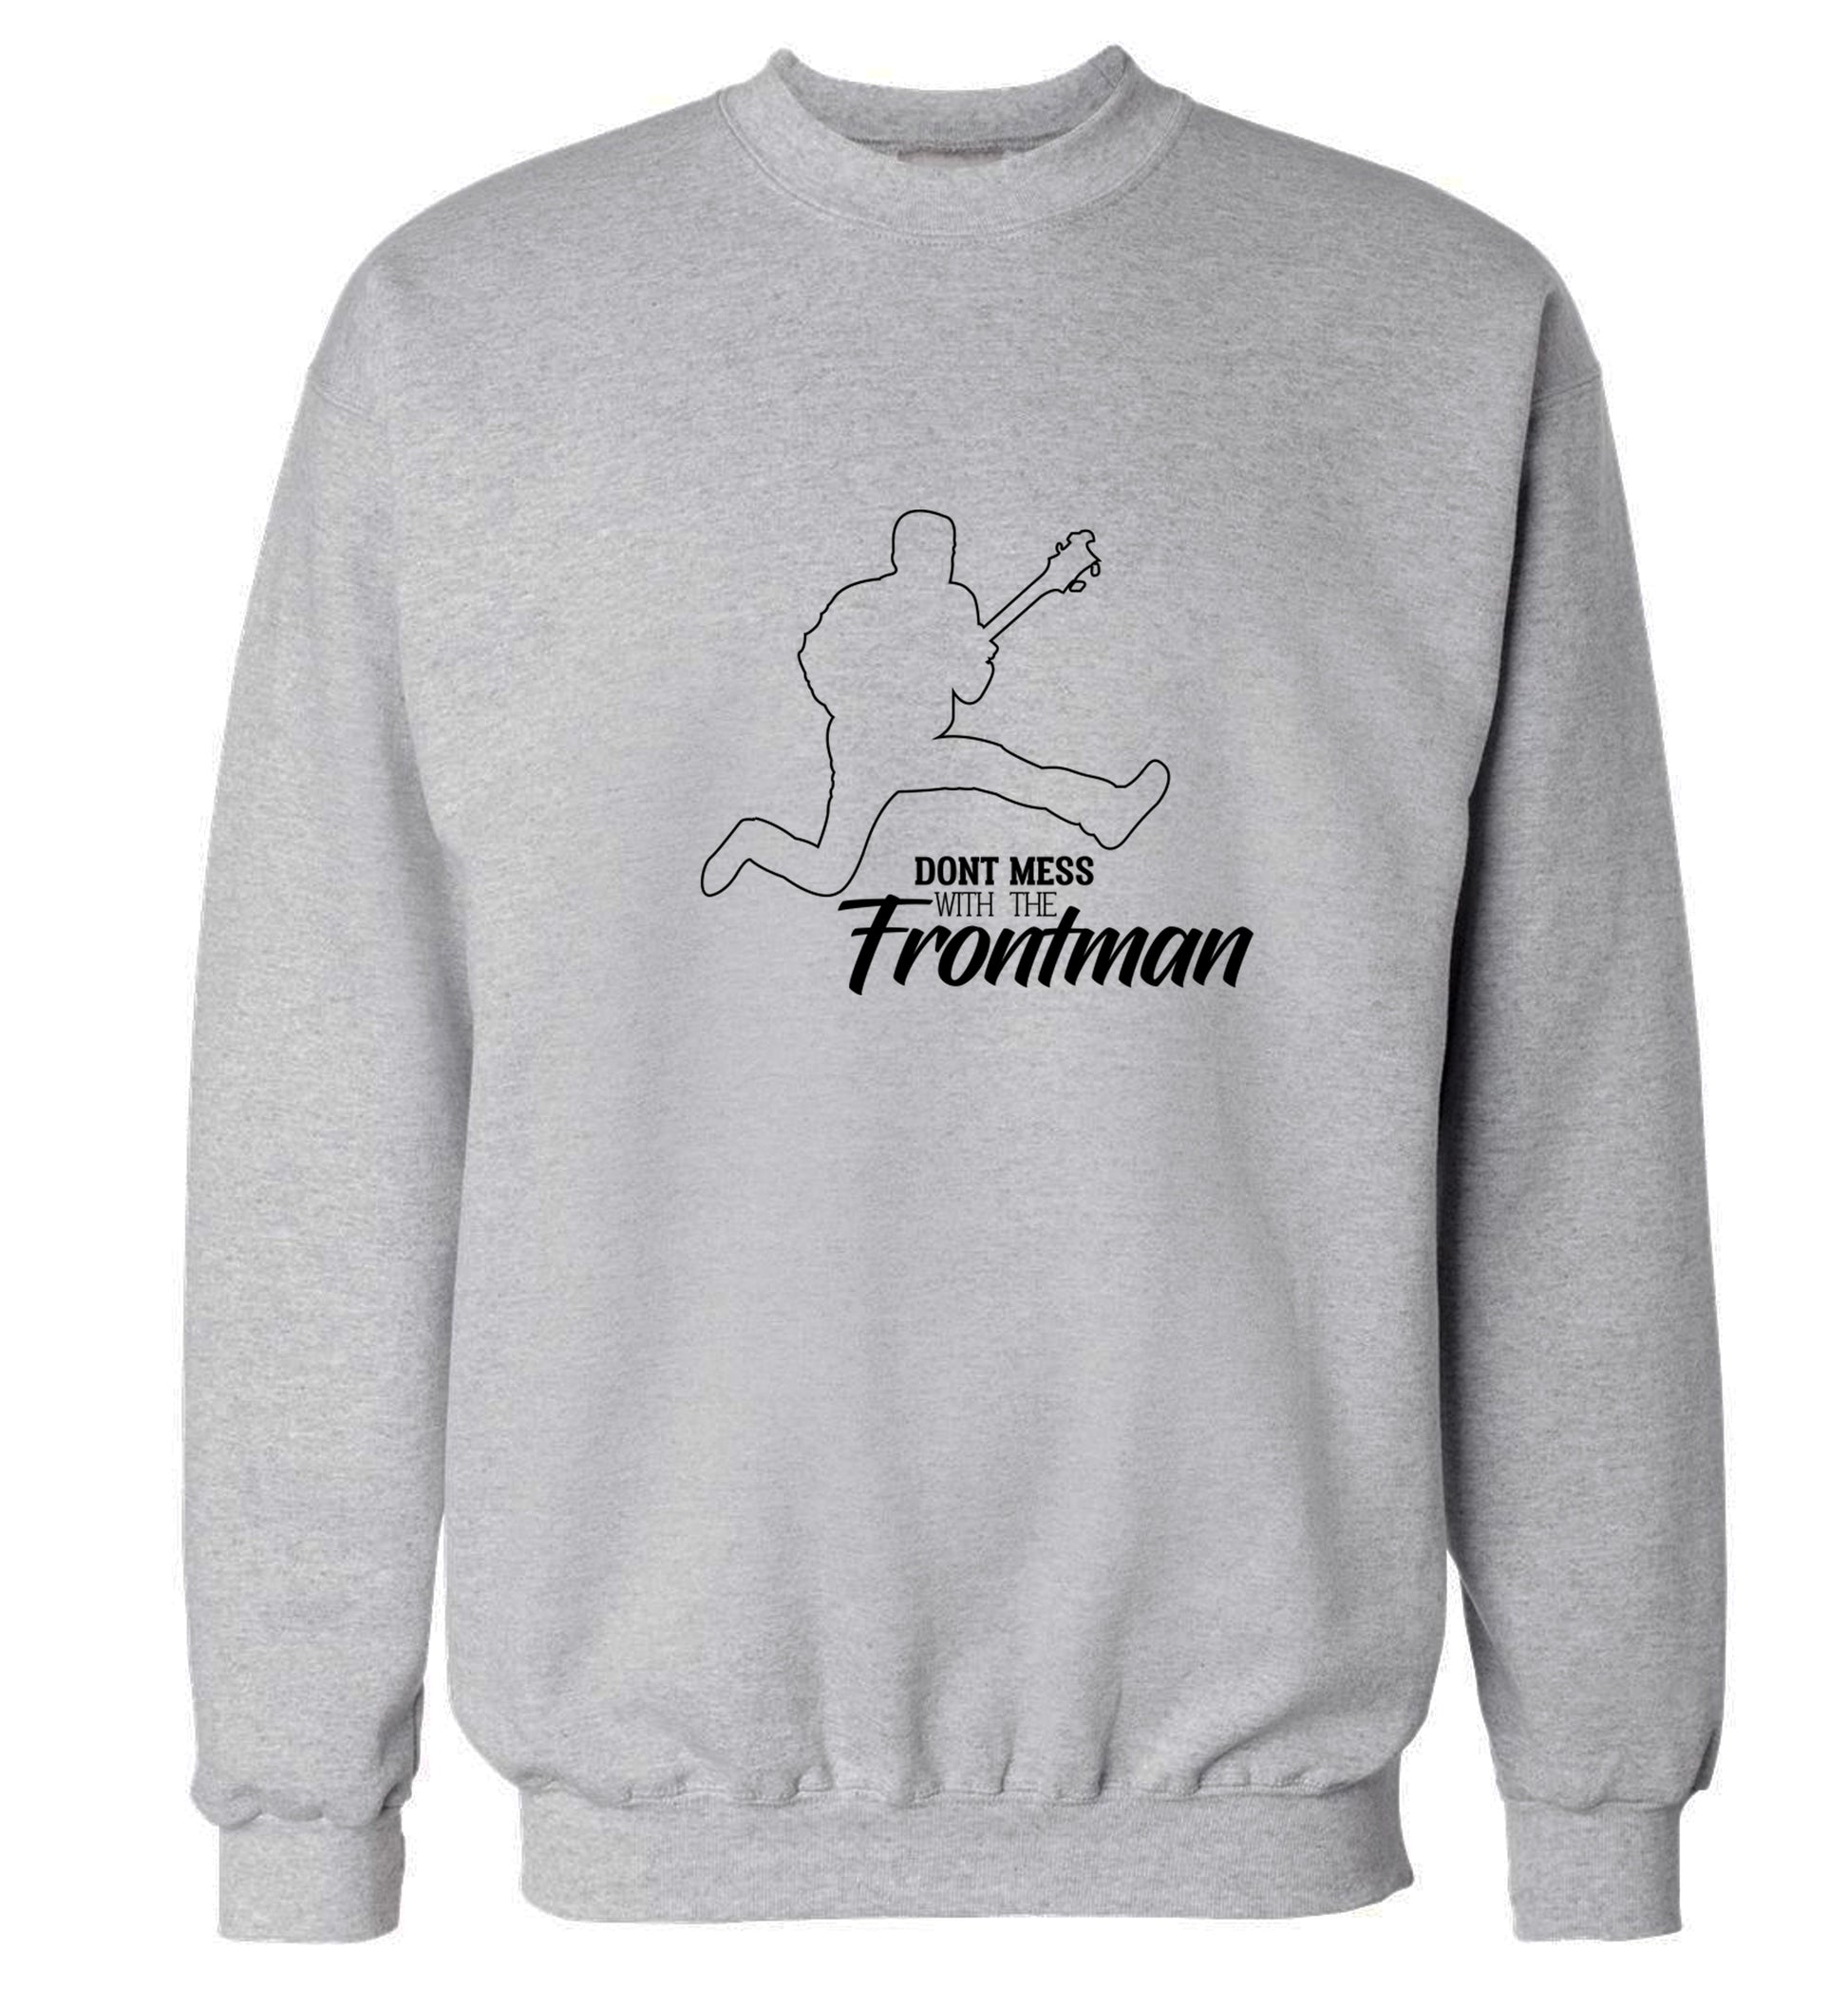 Don't mess with the frontman Adult's unisex grey Sweater 2XL